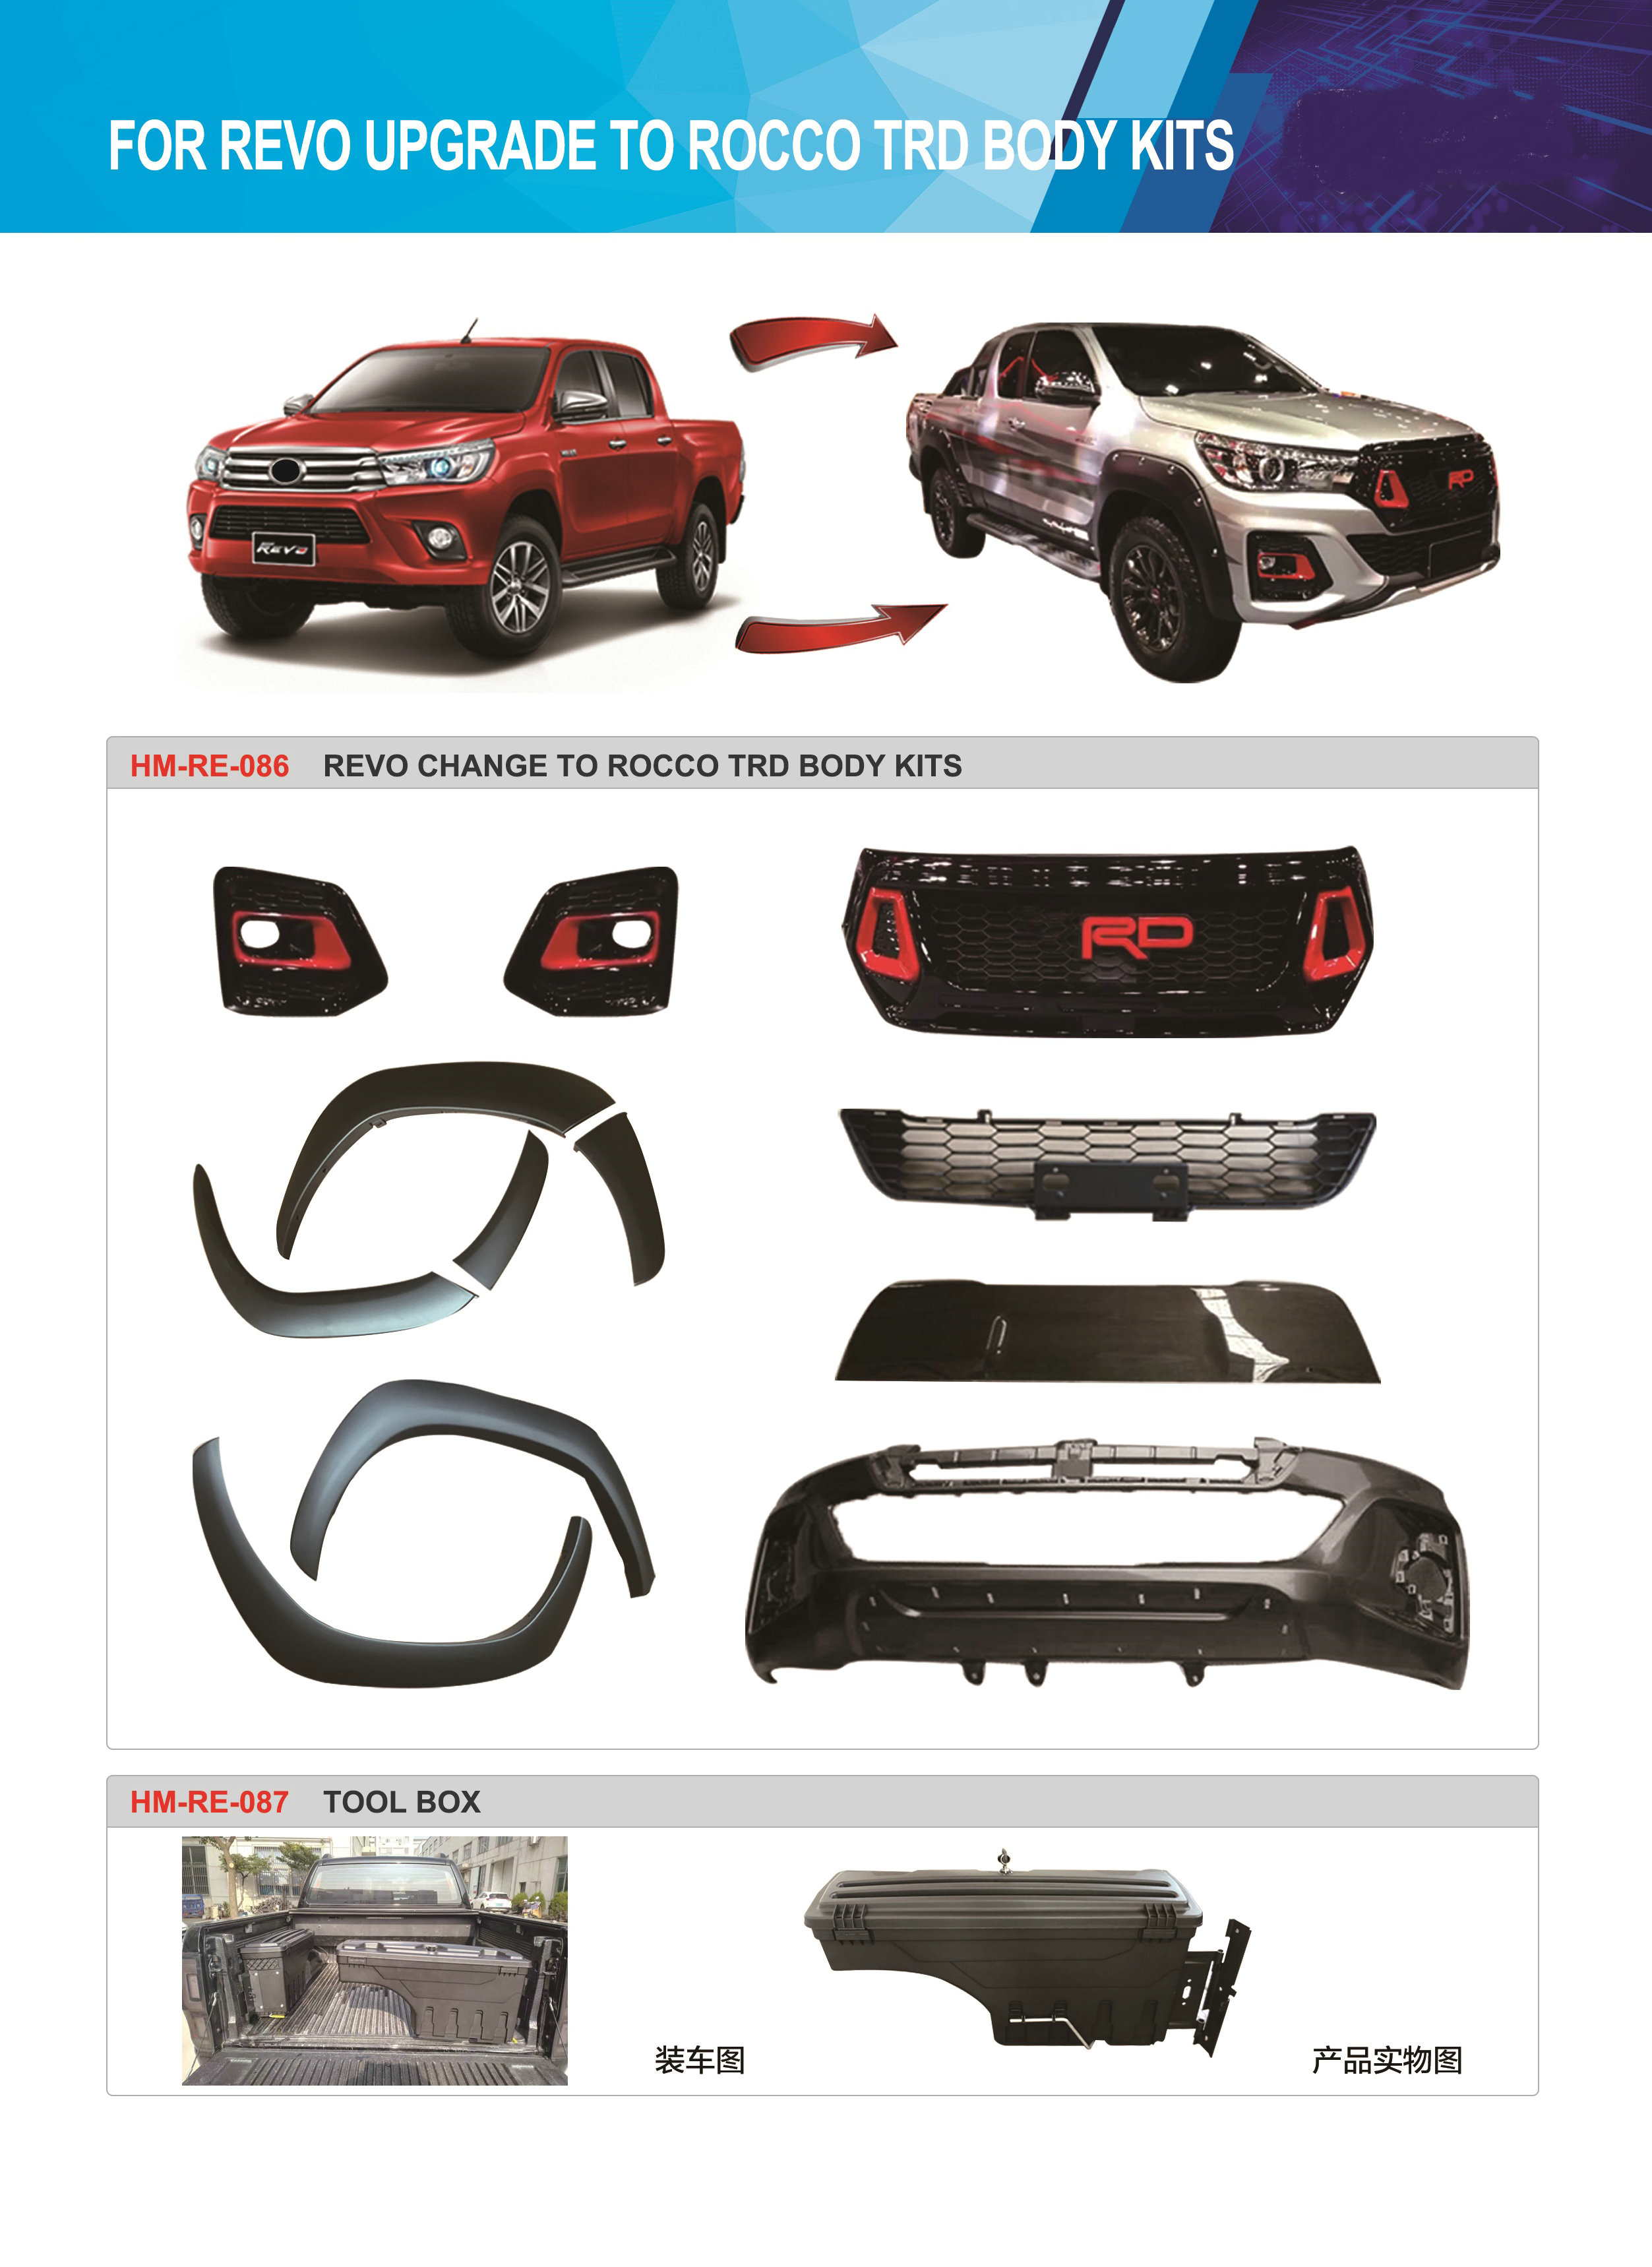 Revo Upgrade To Rocco TRD Body Kits Featured Image